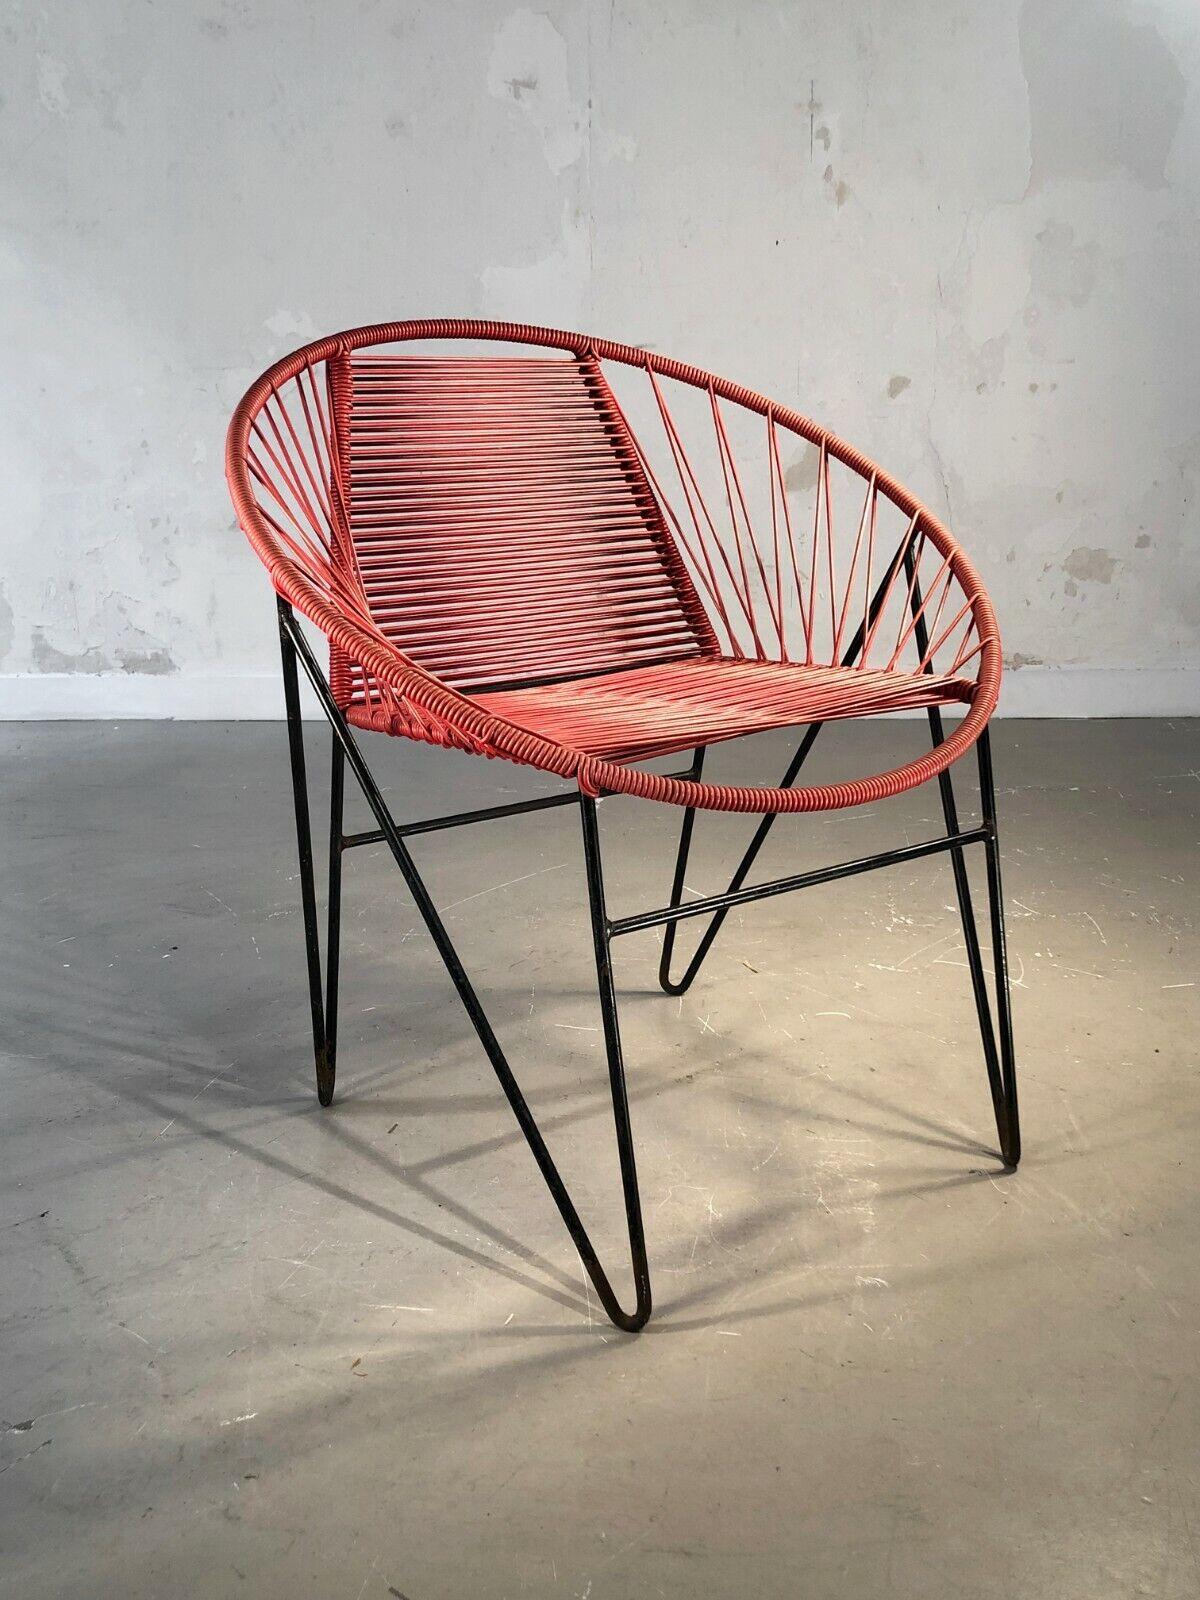 A very graphic chair with compass legs, Modernist, Free Form, Reconstruction, black lacquered metal compass legs, seat and back in red vinyl yarn composition, attributed to Raoul Guys, France 1950.